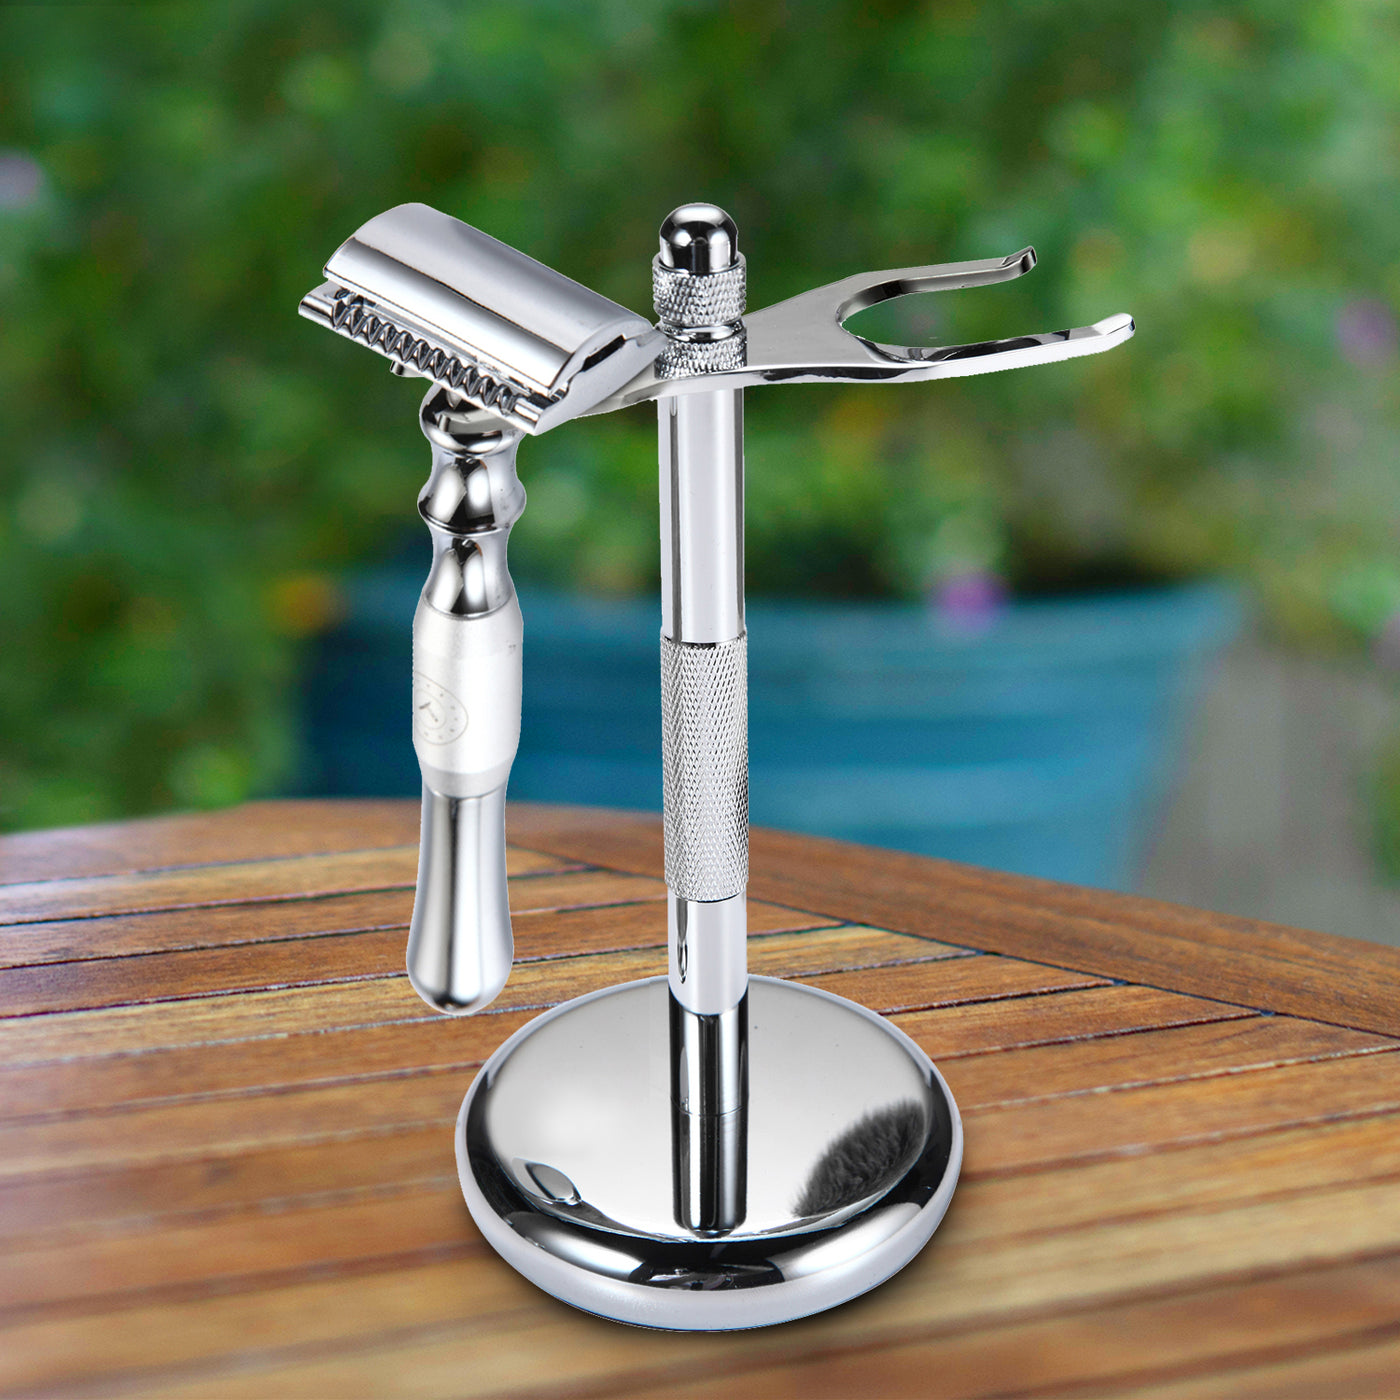  Bleoberis Closed Comb Safety Razor | Silver by Naked Armor sold by Naked Armor Razors